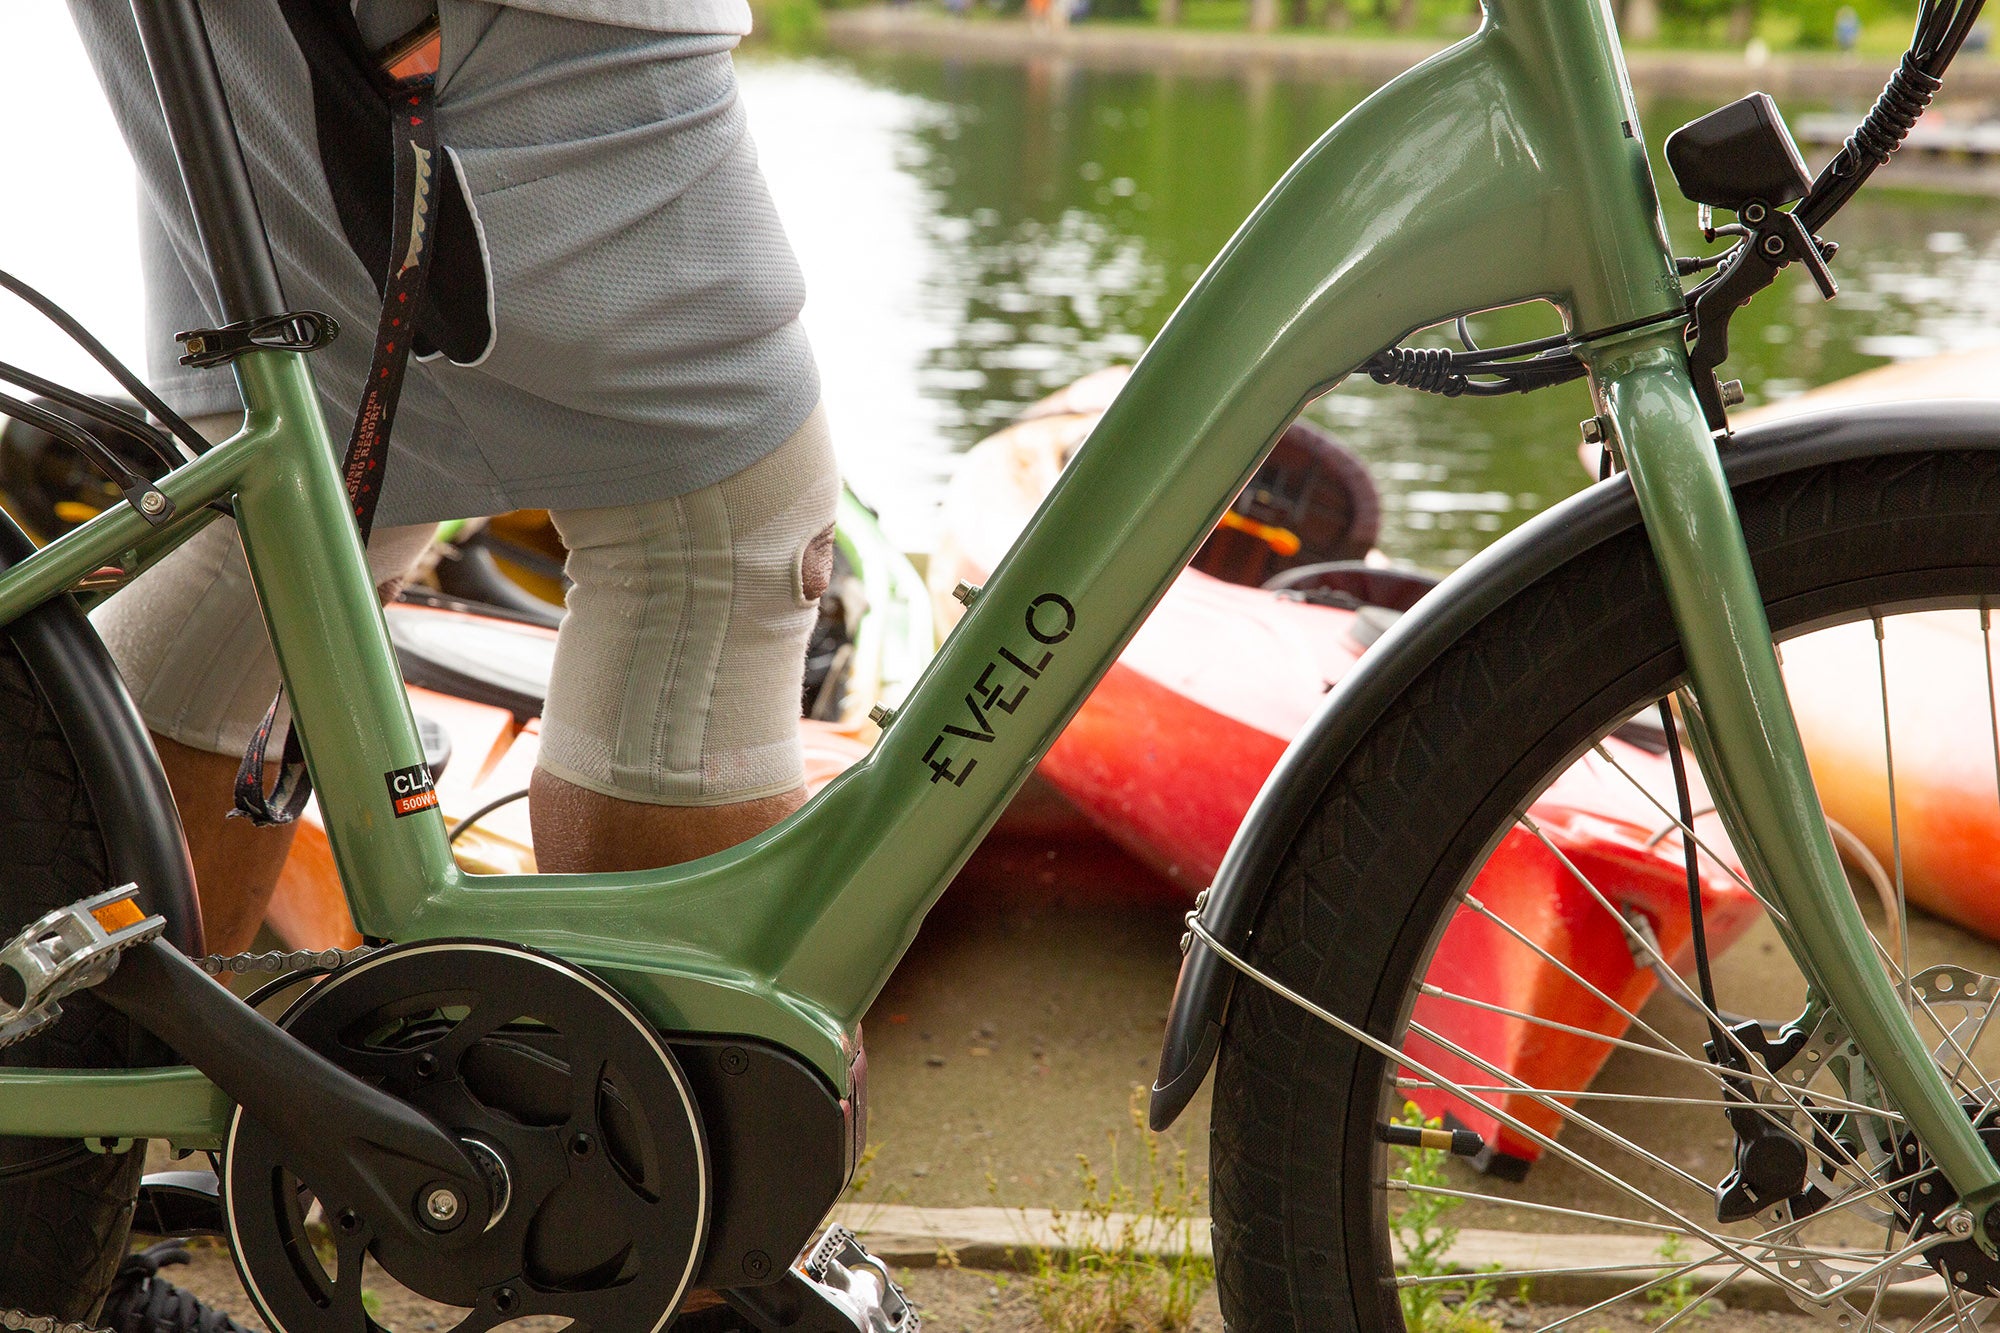 5 Reasons Why An ebike is Great for Chronic Illness